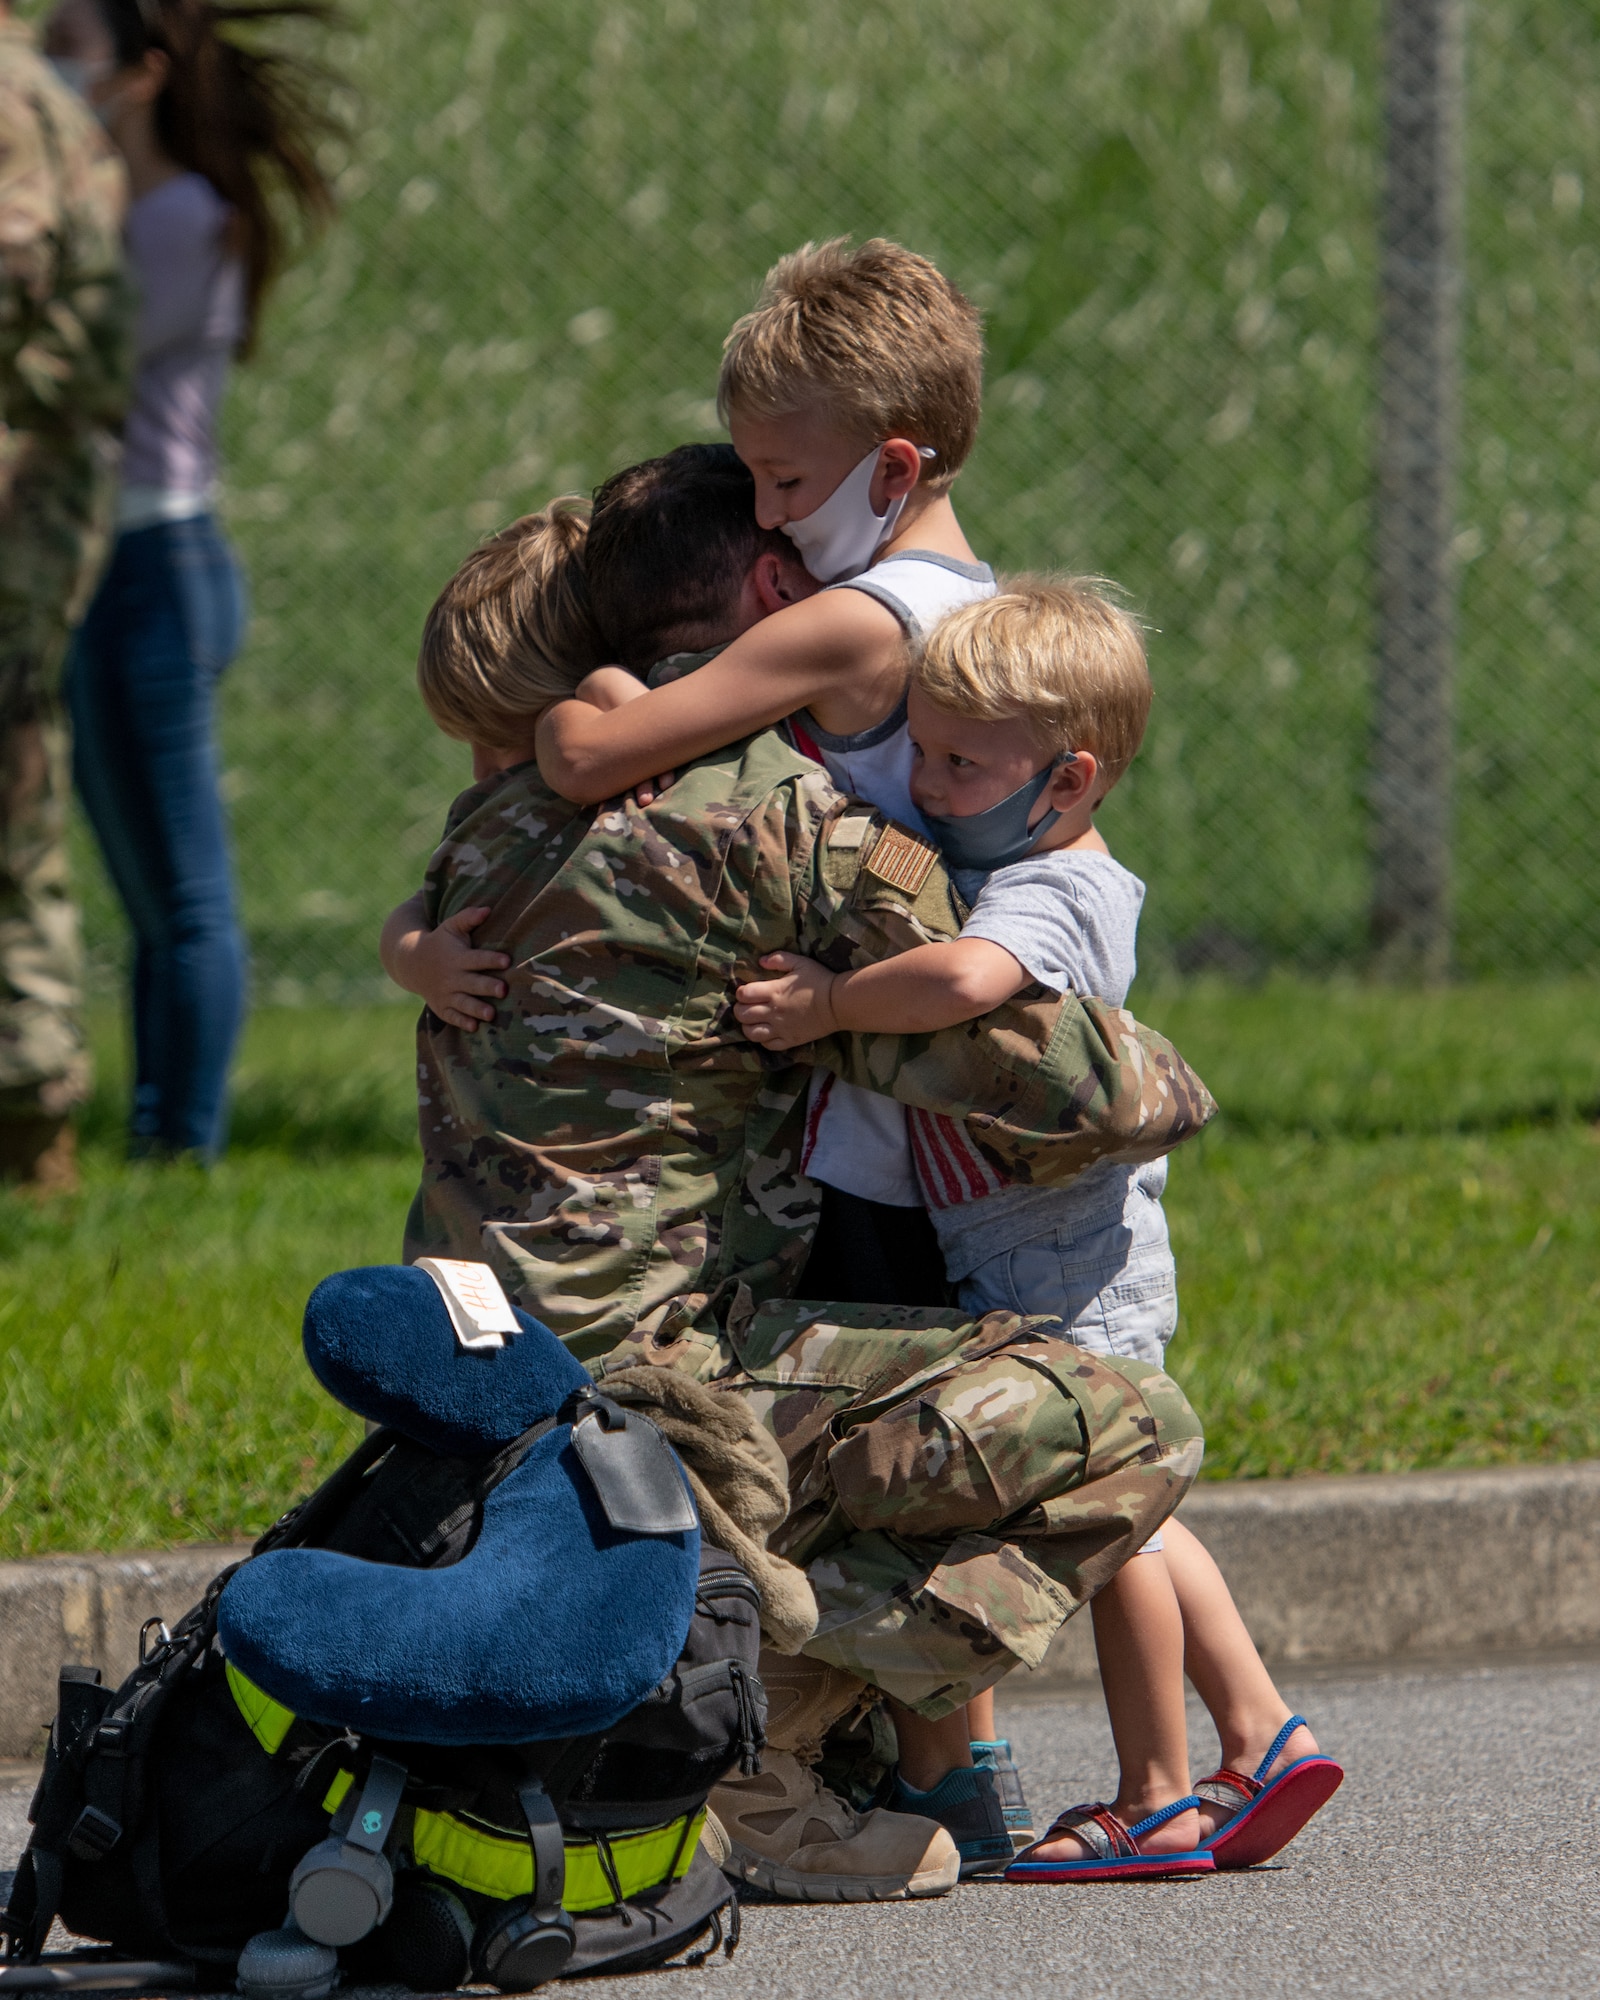 A U.S. Air Force Airman embraces his children upon returning from a deployment to U.S. Central Command Oct. 6, 2020, at Kadena Air Base, Japan. Airmen from the 18th Operations and Maintenance Groups deployed to the CENTCOM area of responsibility in support of ongoing operations to maintain air superiority, defend forces on the ground, enhance regional partnerships, and demonstrate a continued commitment to regional security and stability. (U.S. Air Force photo by Staff Sgt. Peter Reft)